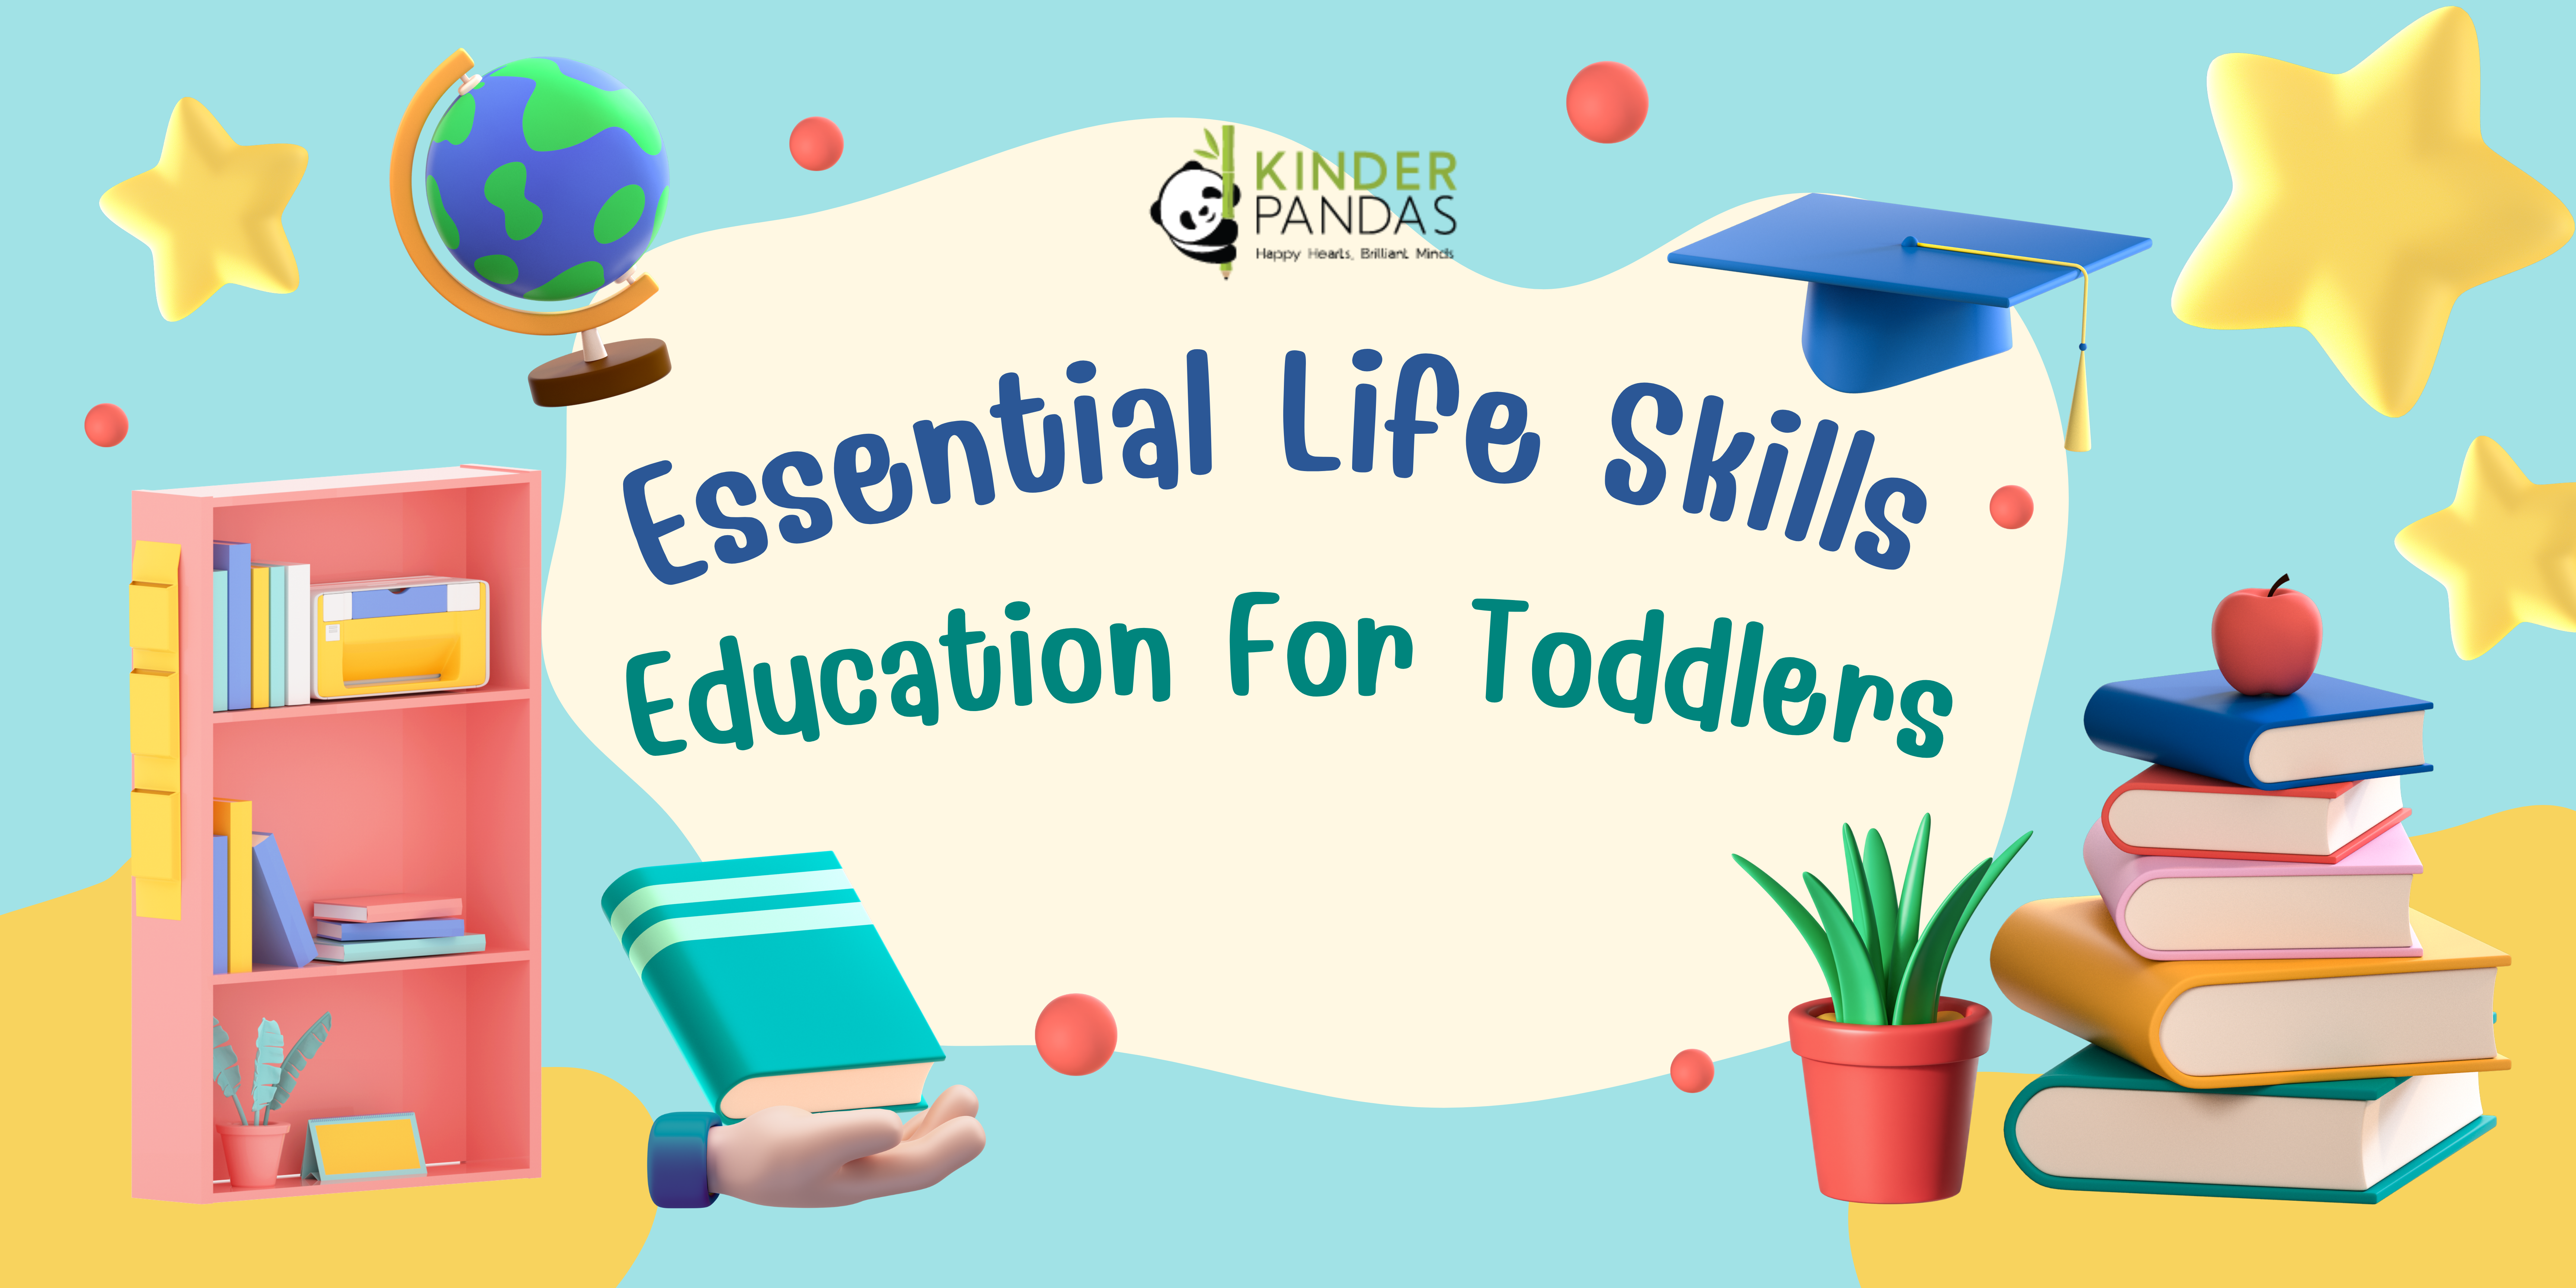 Essential Life Skills Education For Toddlers